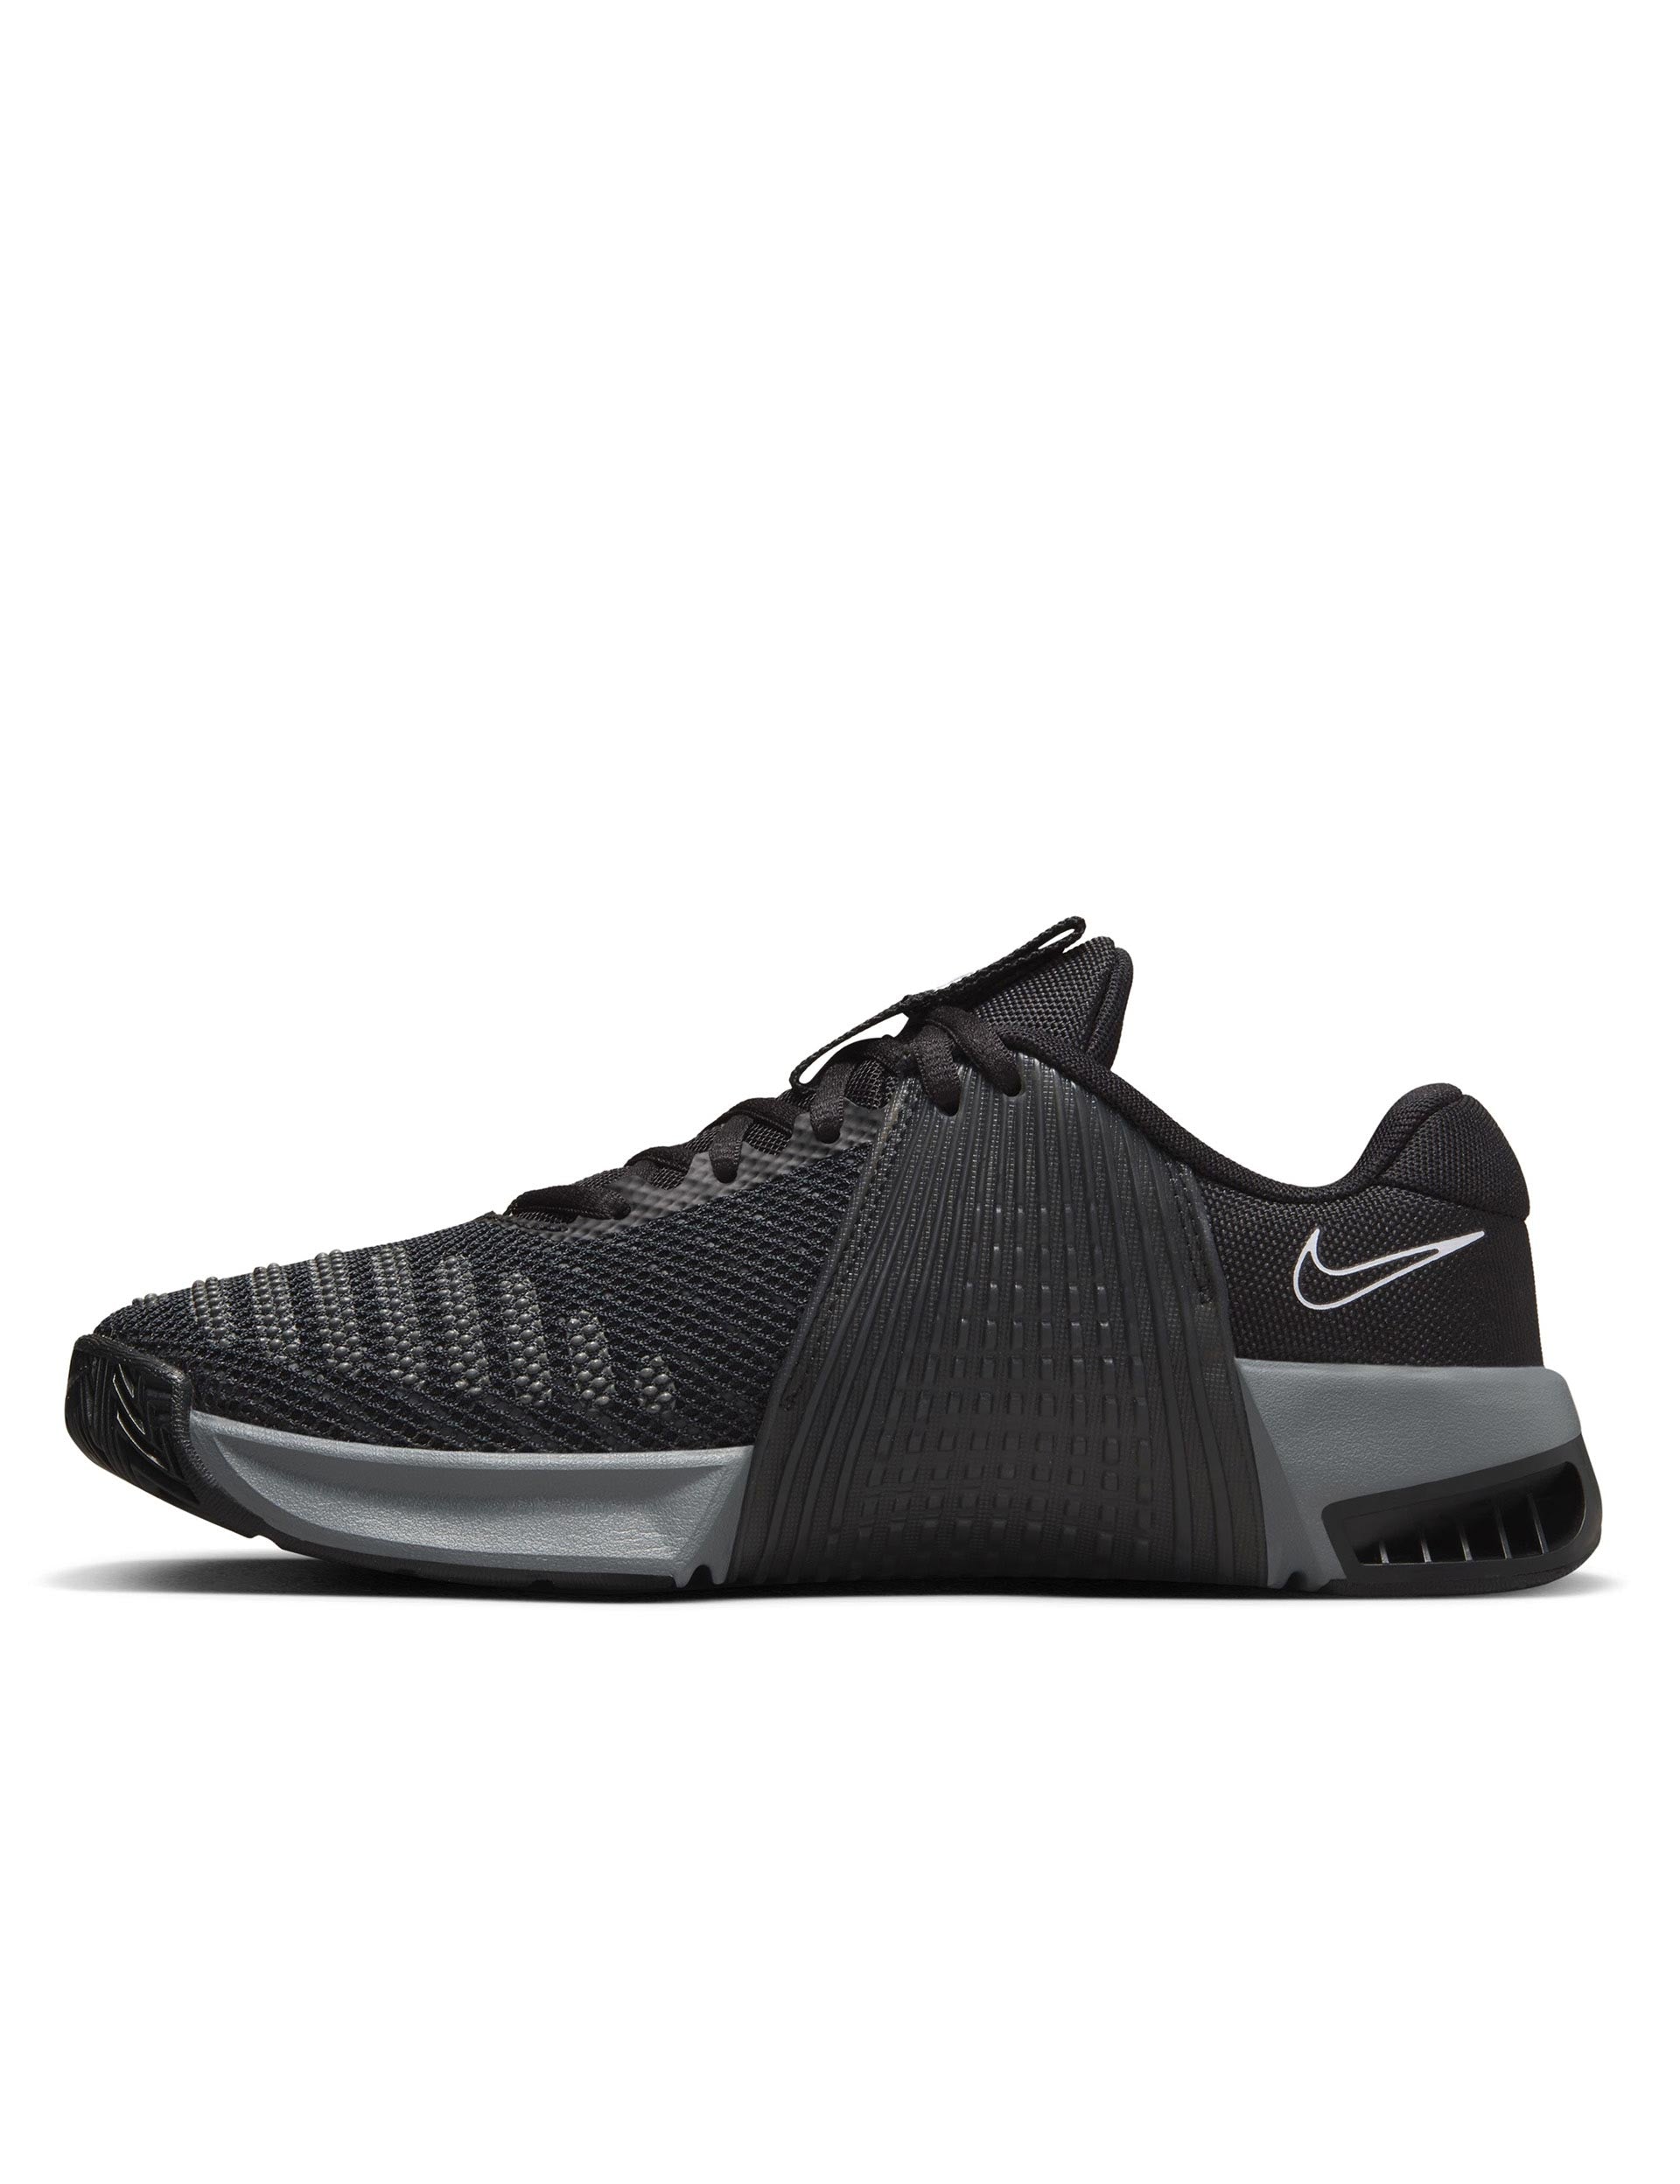 Nike | Metcon 9 Shoes - Black/Anthracite/Grey/White | The Sports Edit